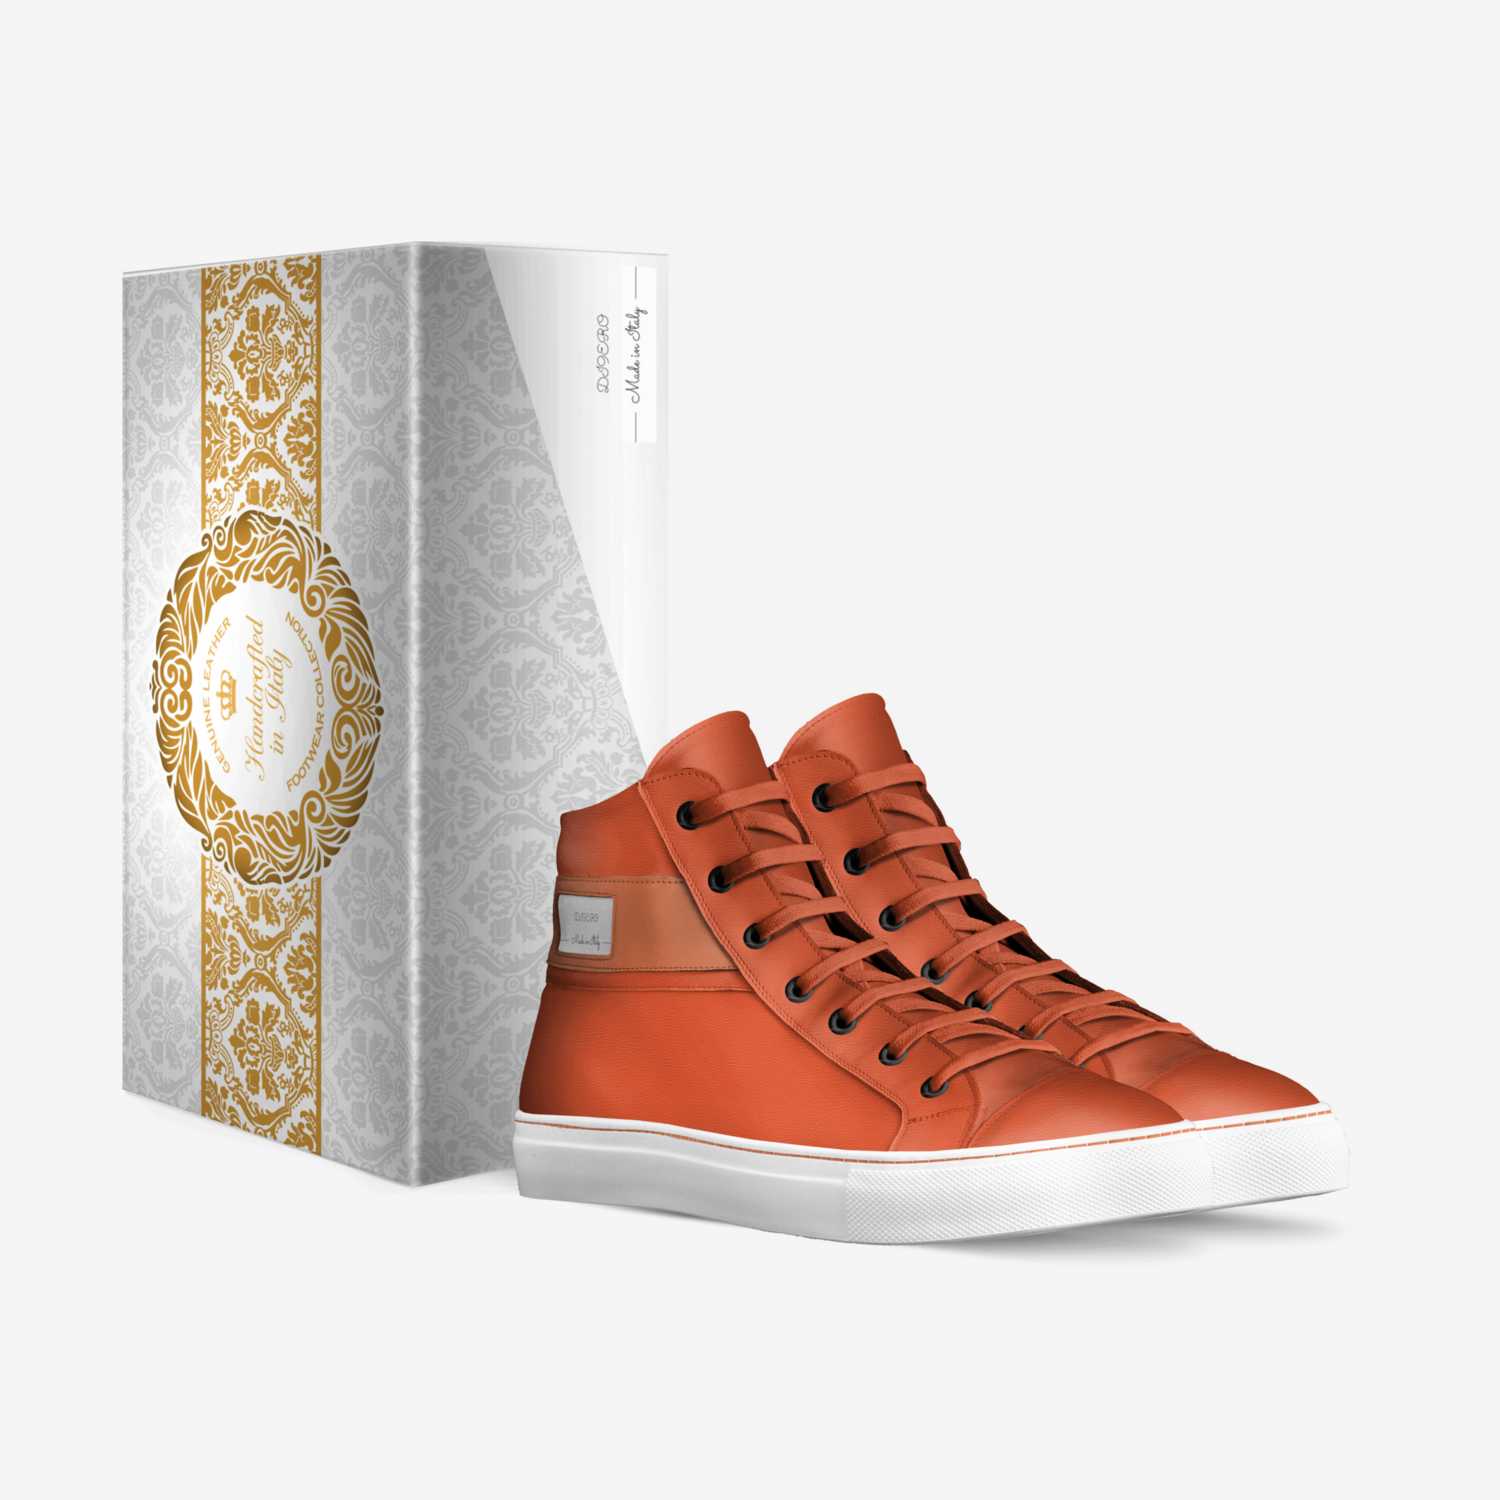 DI9ERO custom made in Italy shoes by Zion Sails | Box view